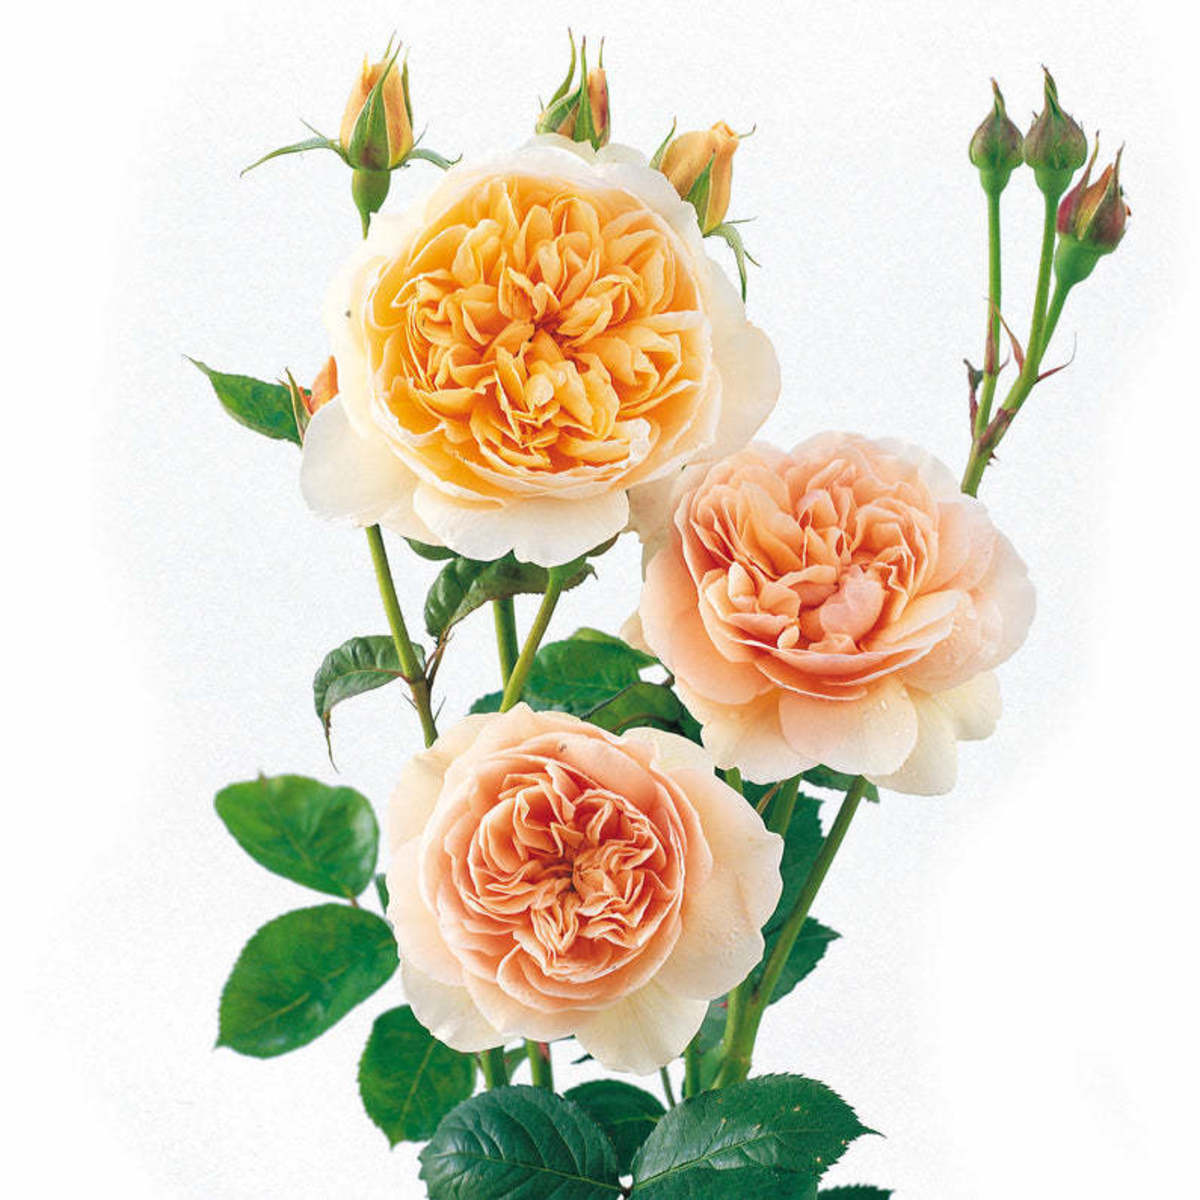 the-most-expensive-rose-in-the-world-sweet-juliet-rose